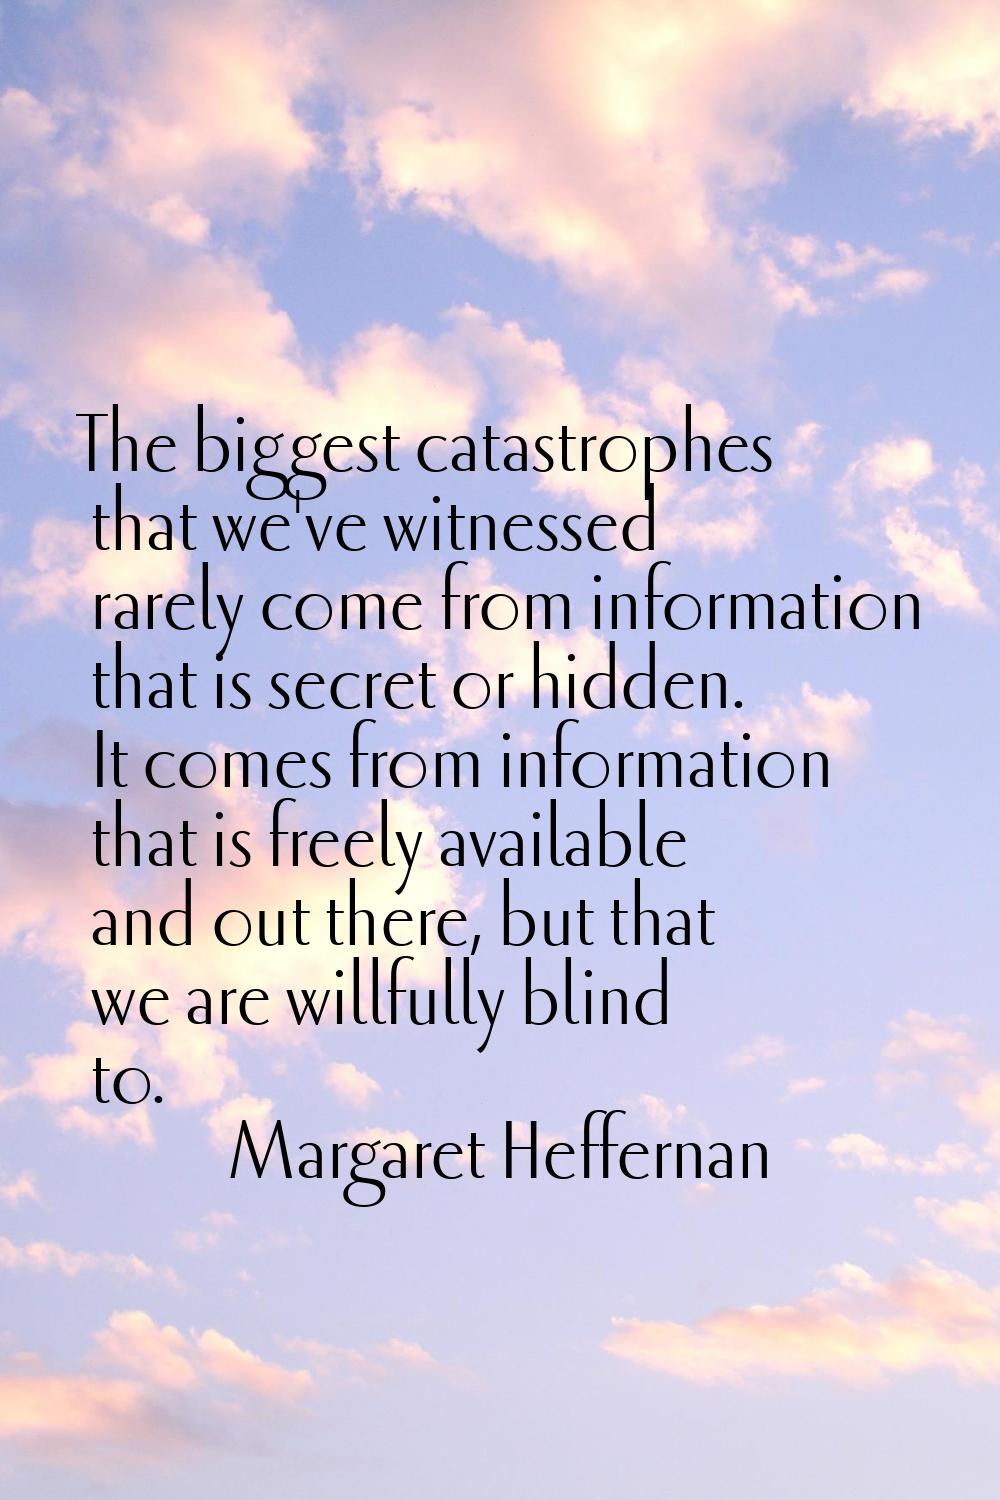 The biggest catastrophes that we've witnessed rarely come from information that is secret or hidden